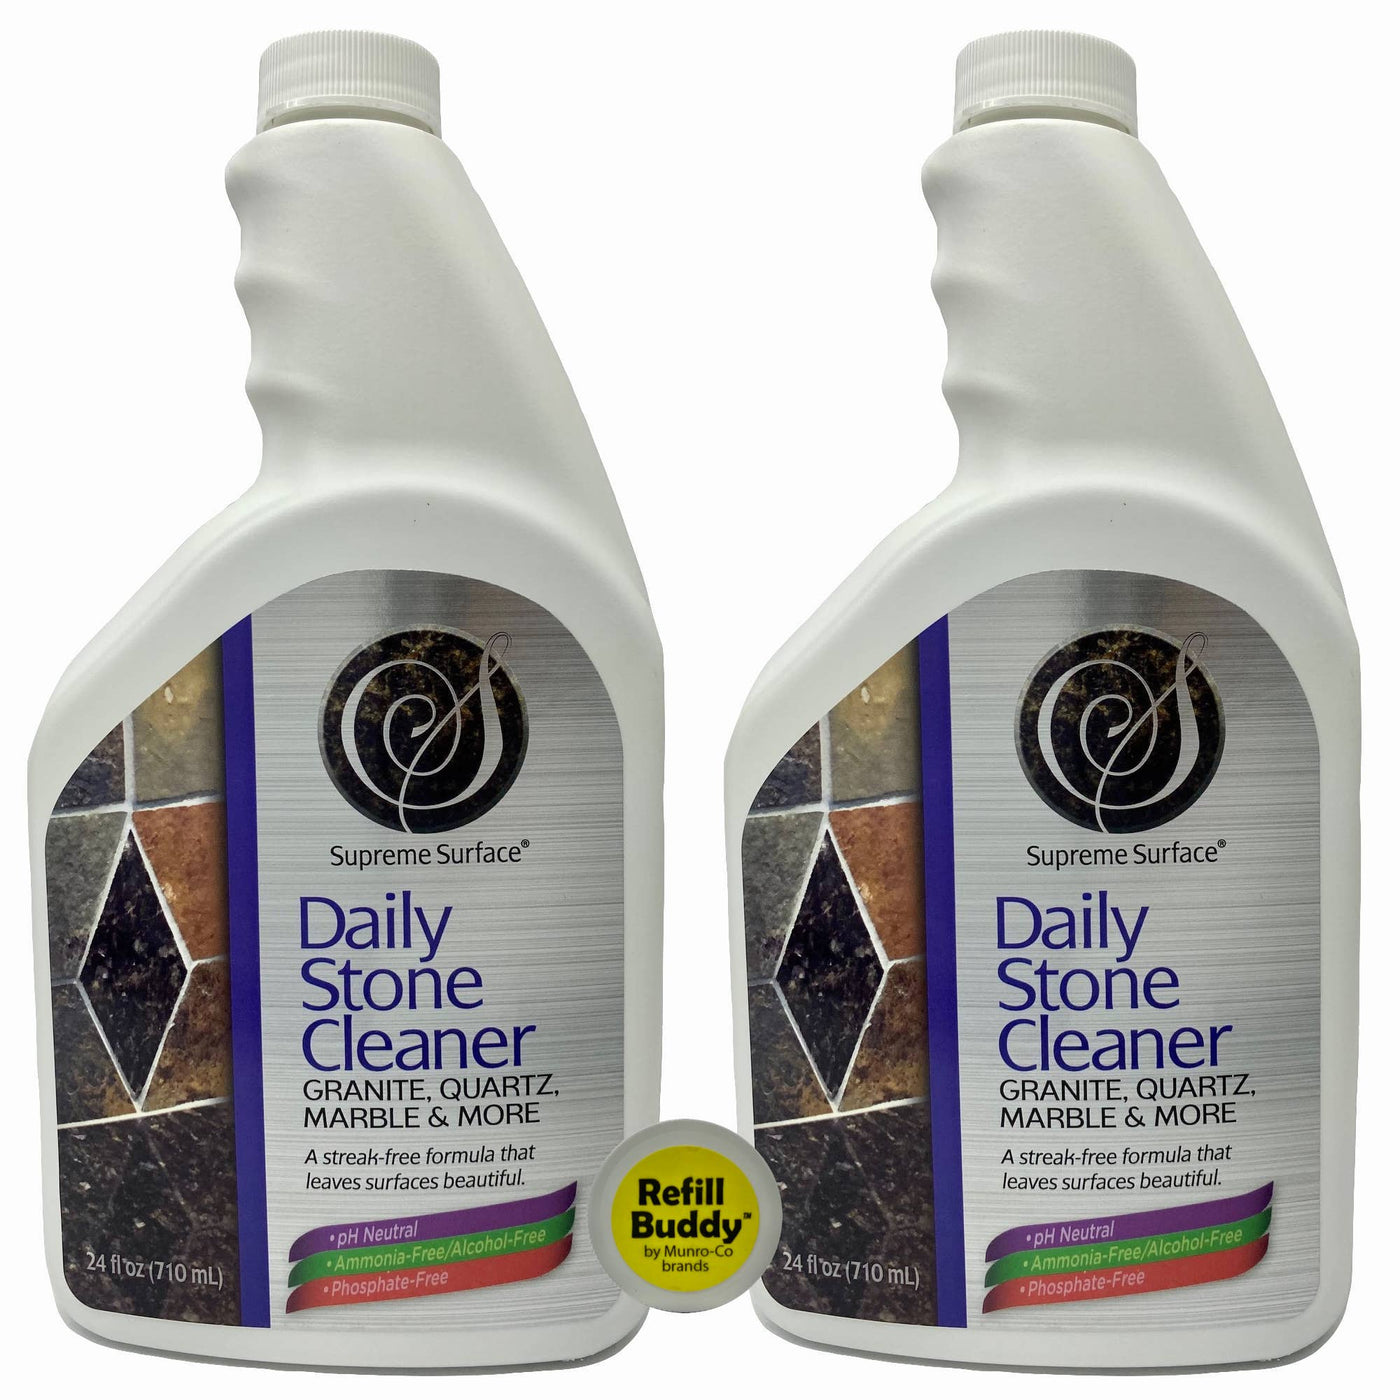 Daily Stone Cleaner, Refill Buddy (2) Pack